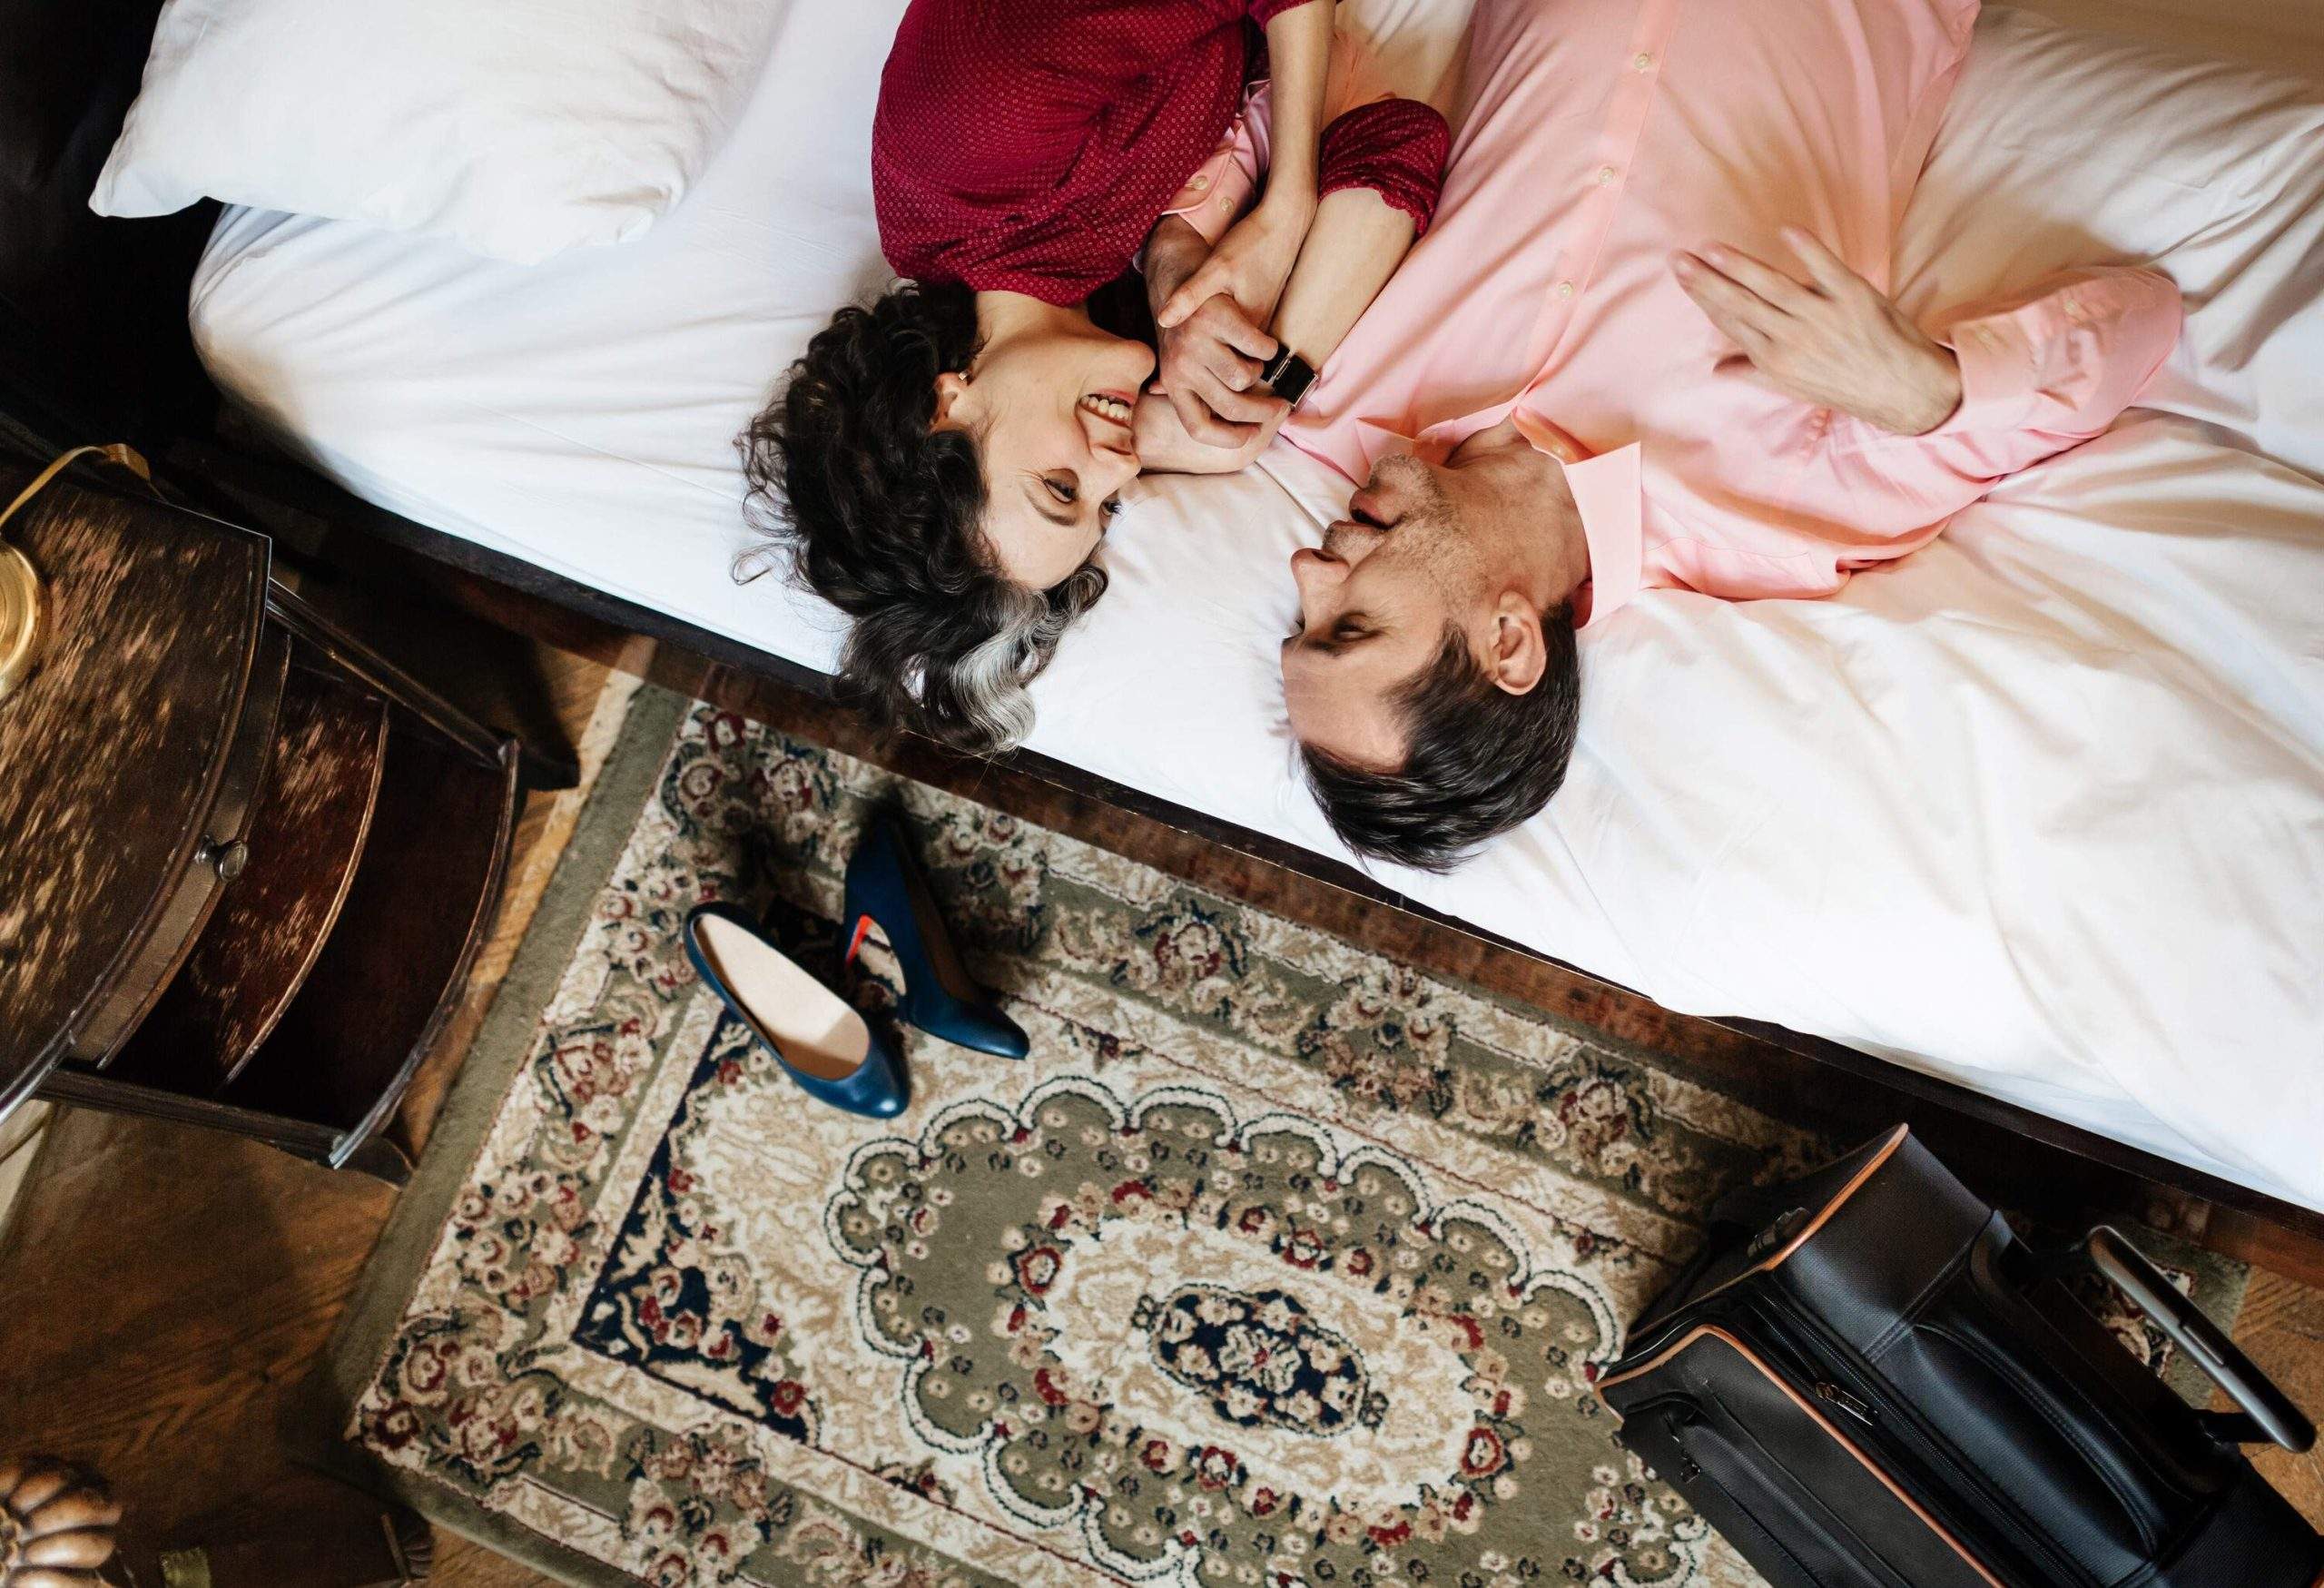 dest_germany_berlin_hotel_room_bed_floor_people_couple_woman_man_gettyimages-634758479-scaled